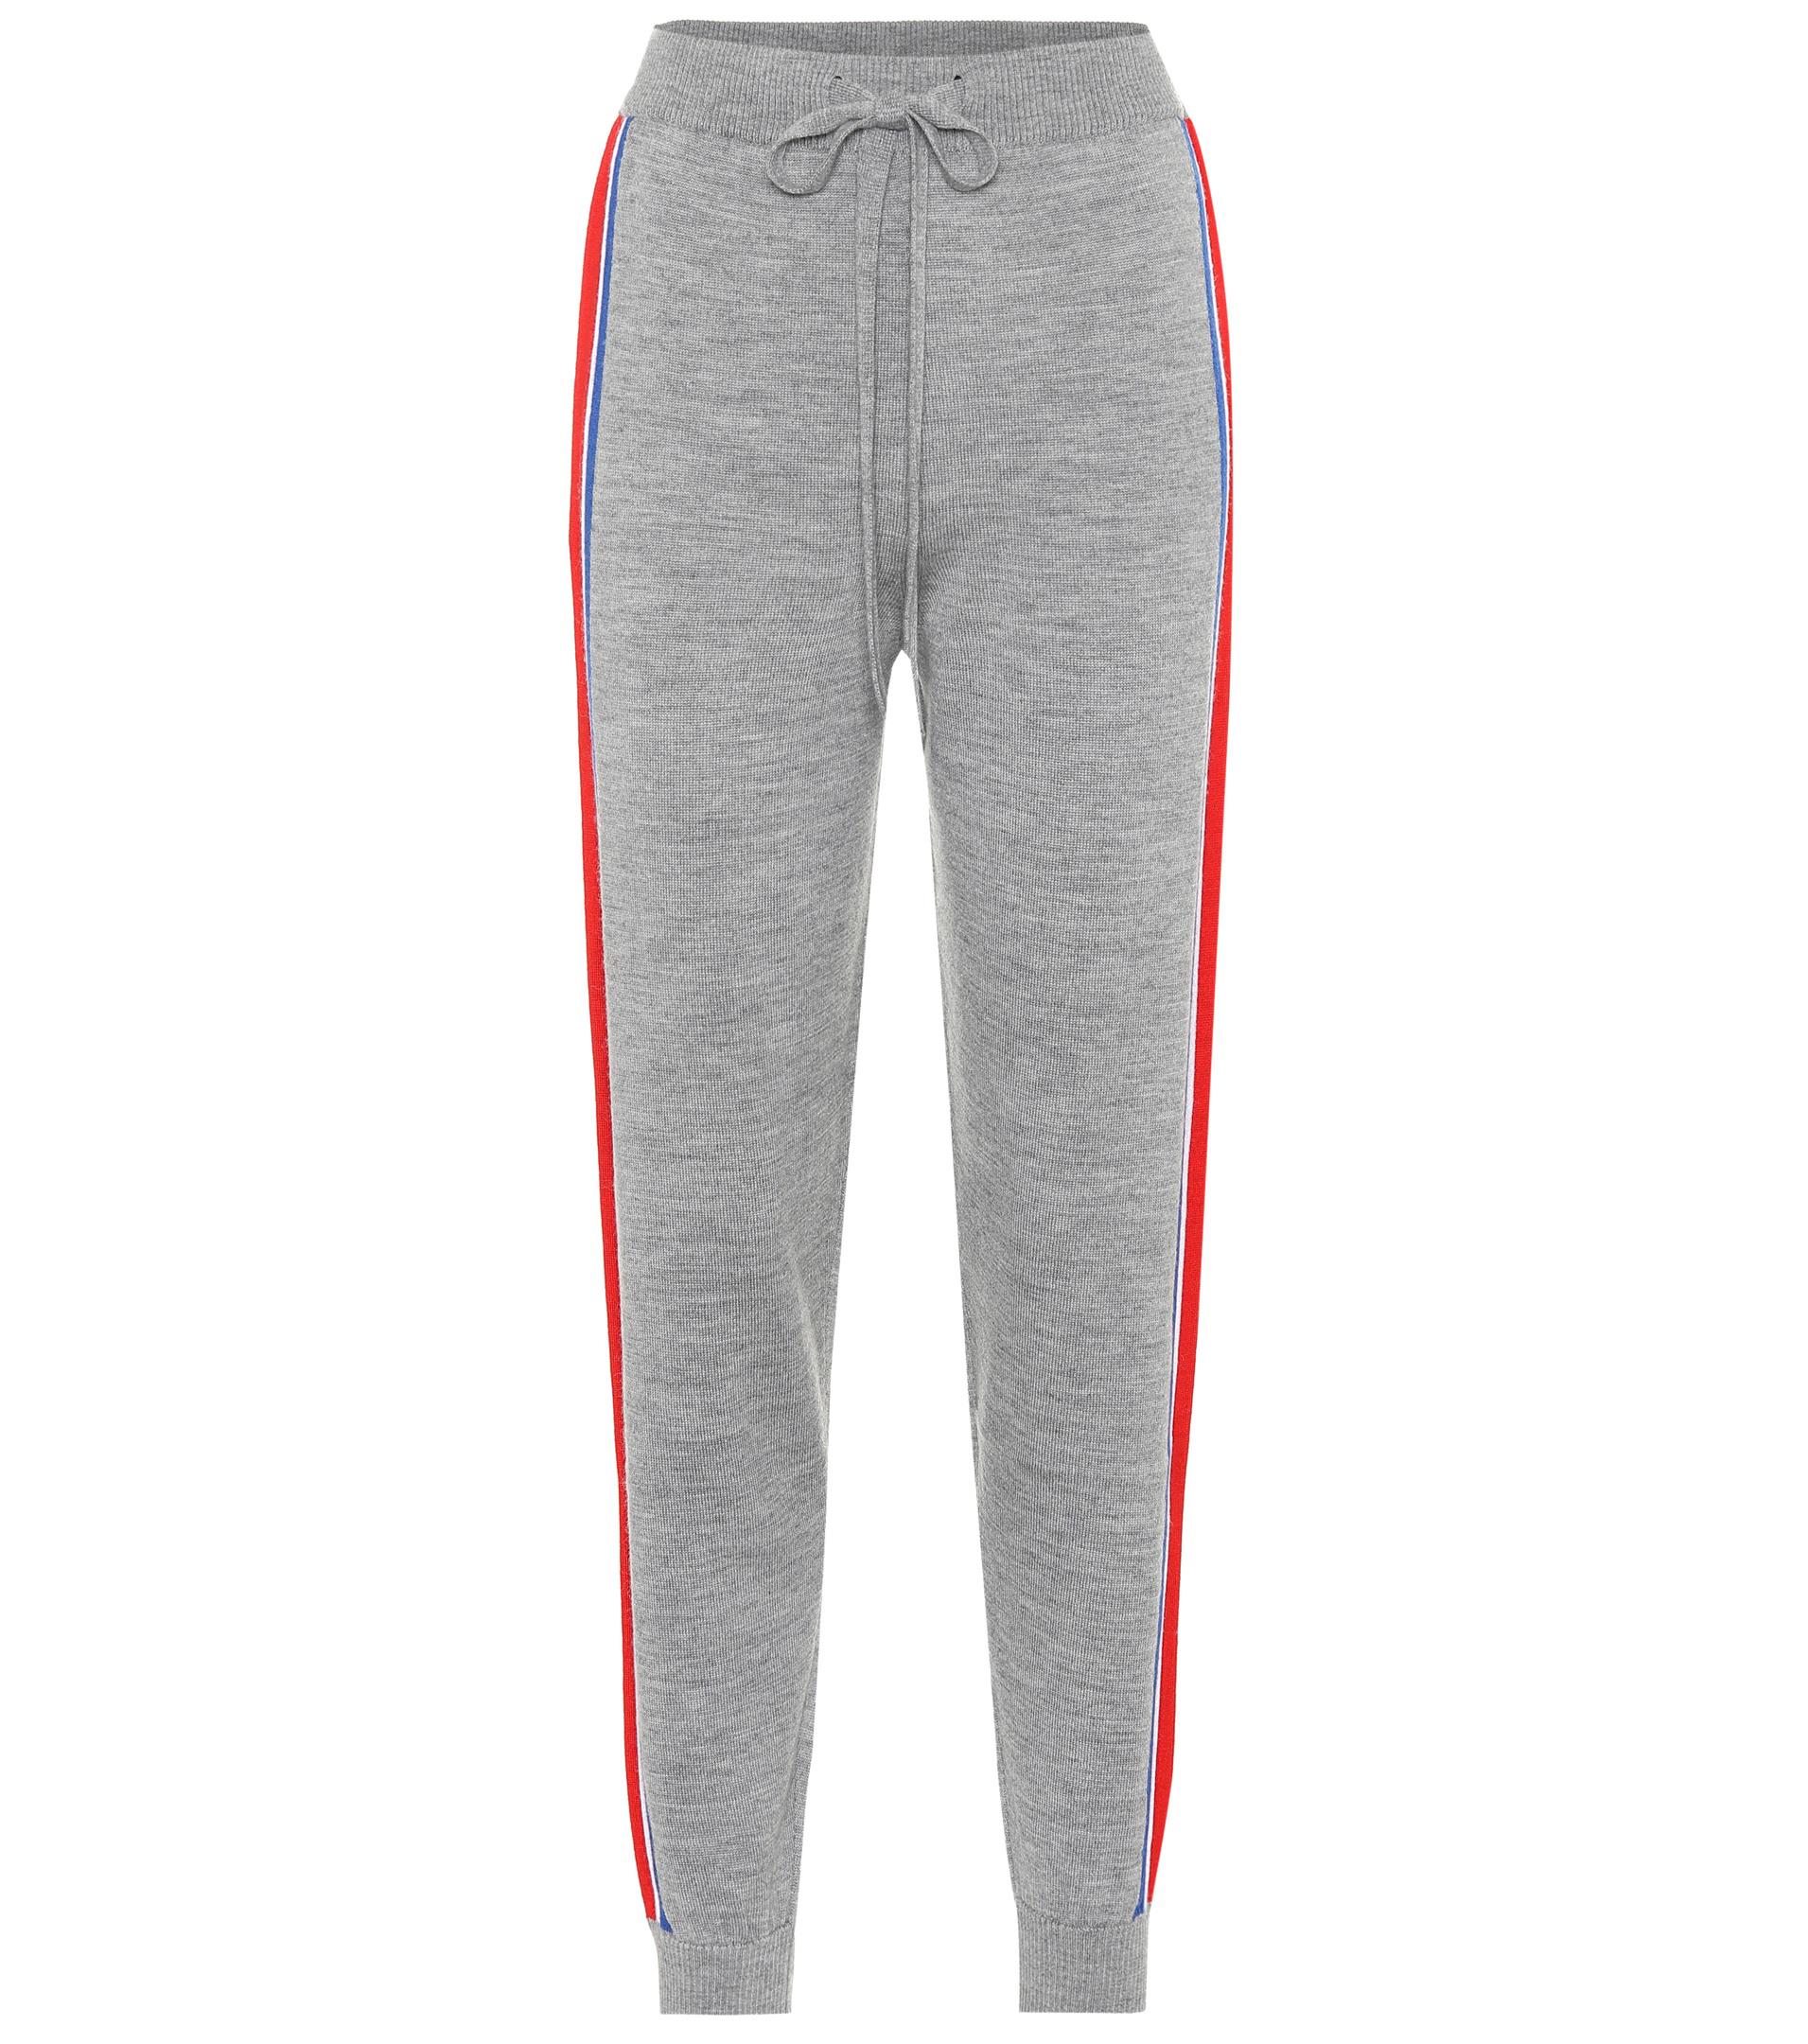 Être Cécile Striped Merino Wool Track Pants in Grey (Gray) - Lyst